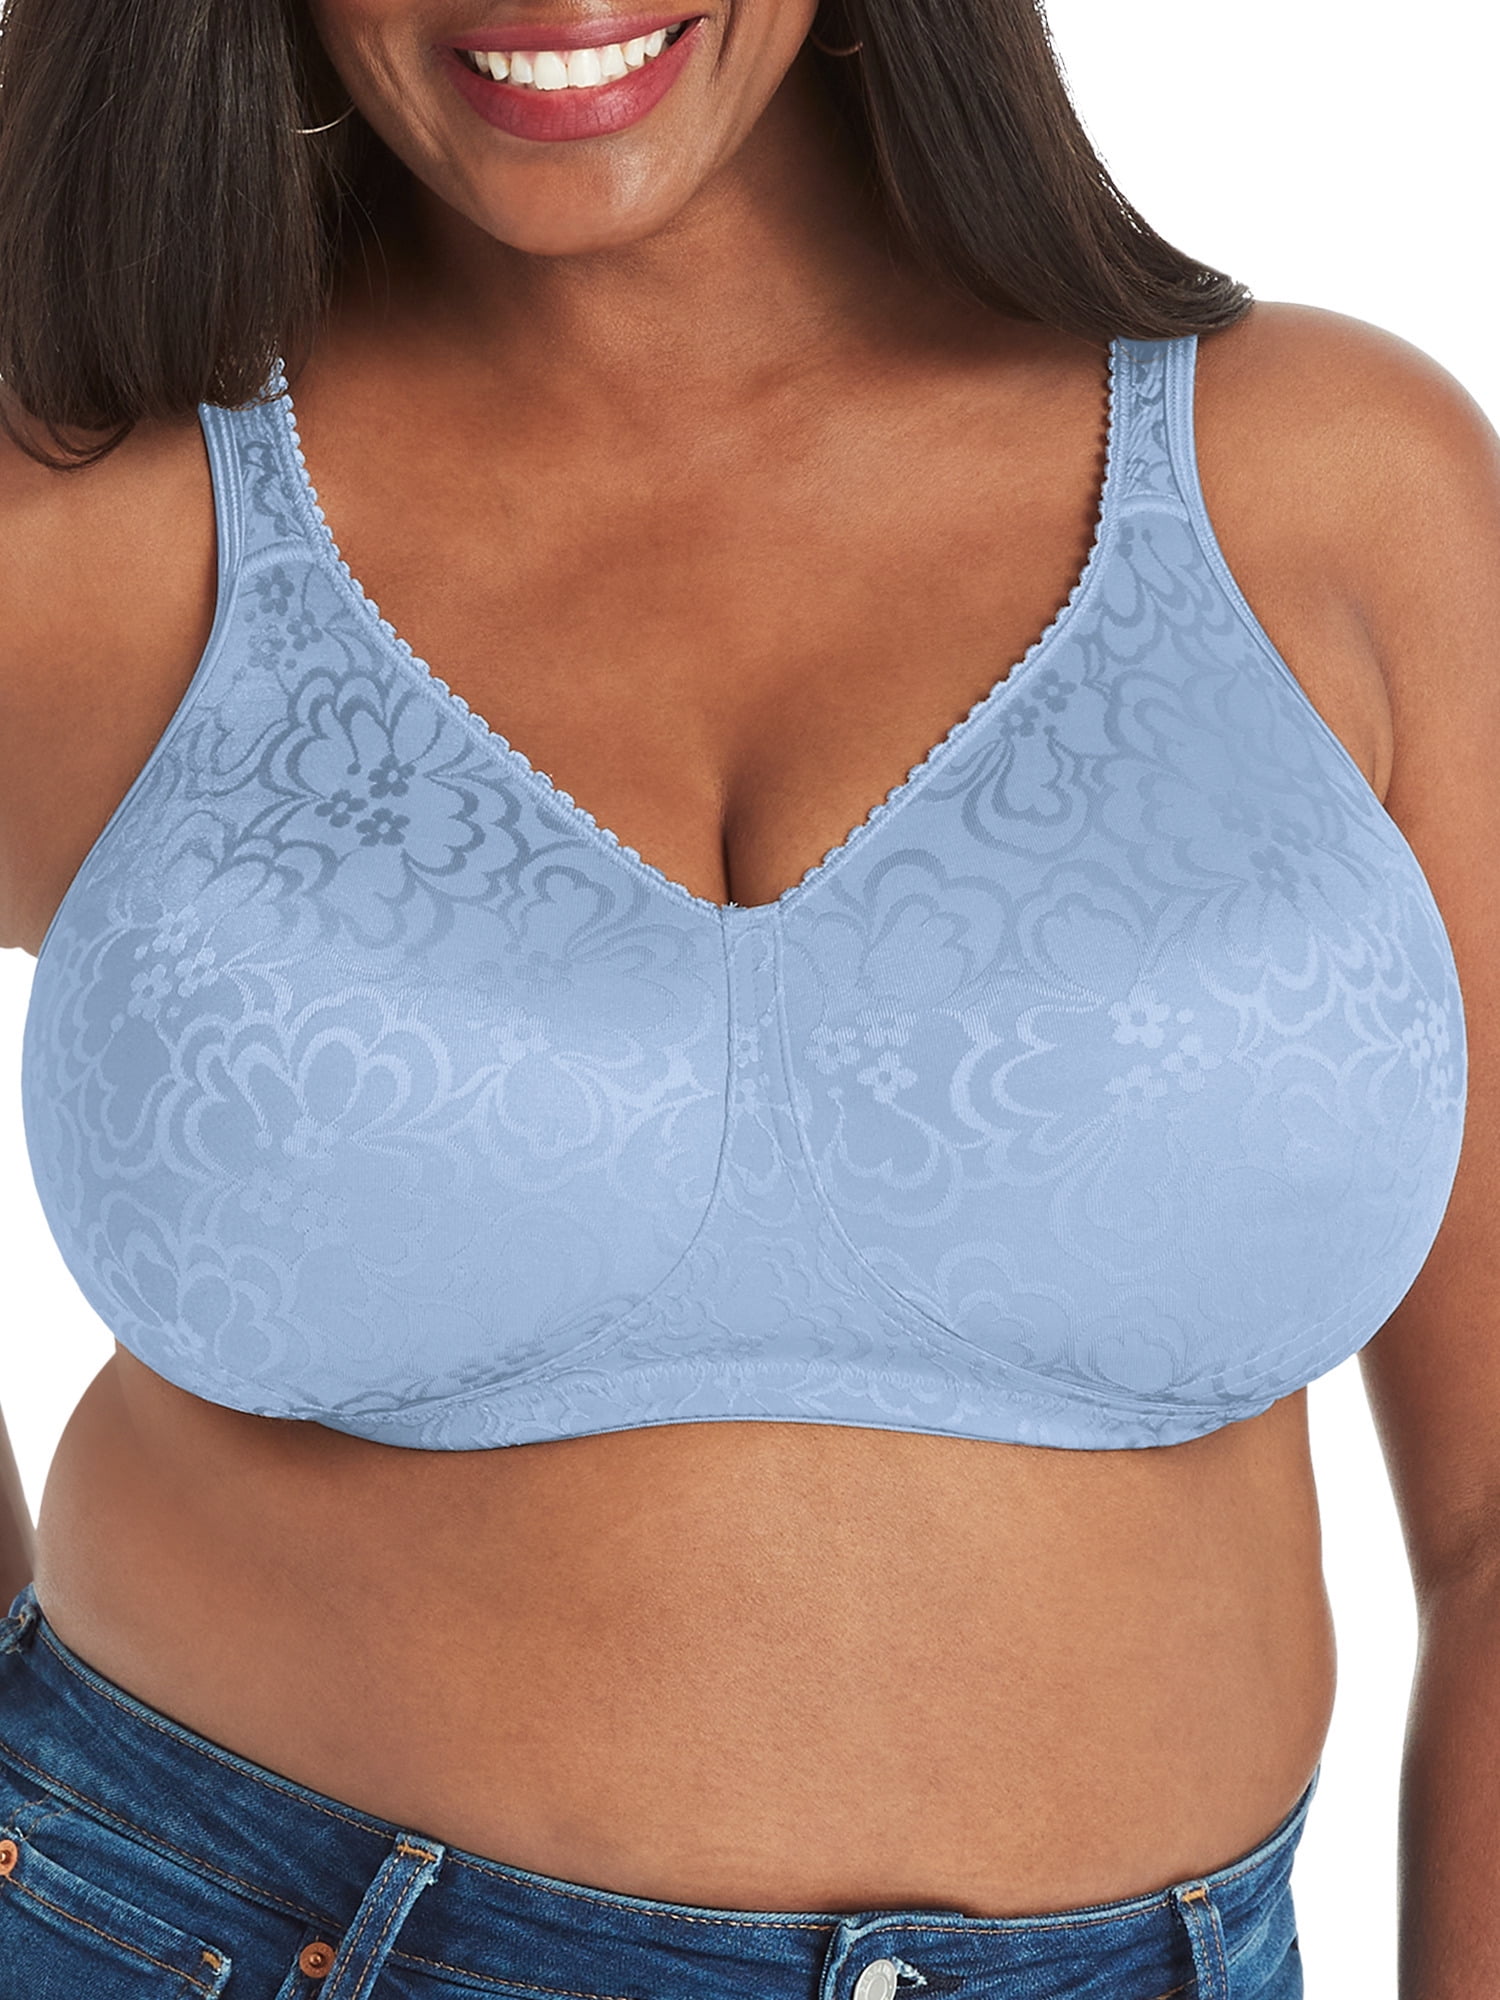 Playtex Women's 18 Hour Ultimate Lift & Support Wirefree Bra